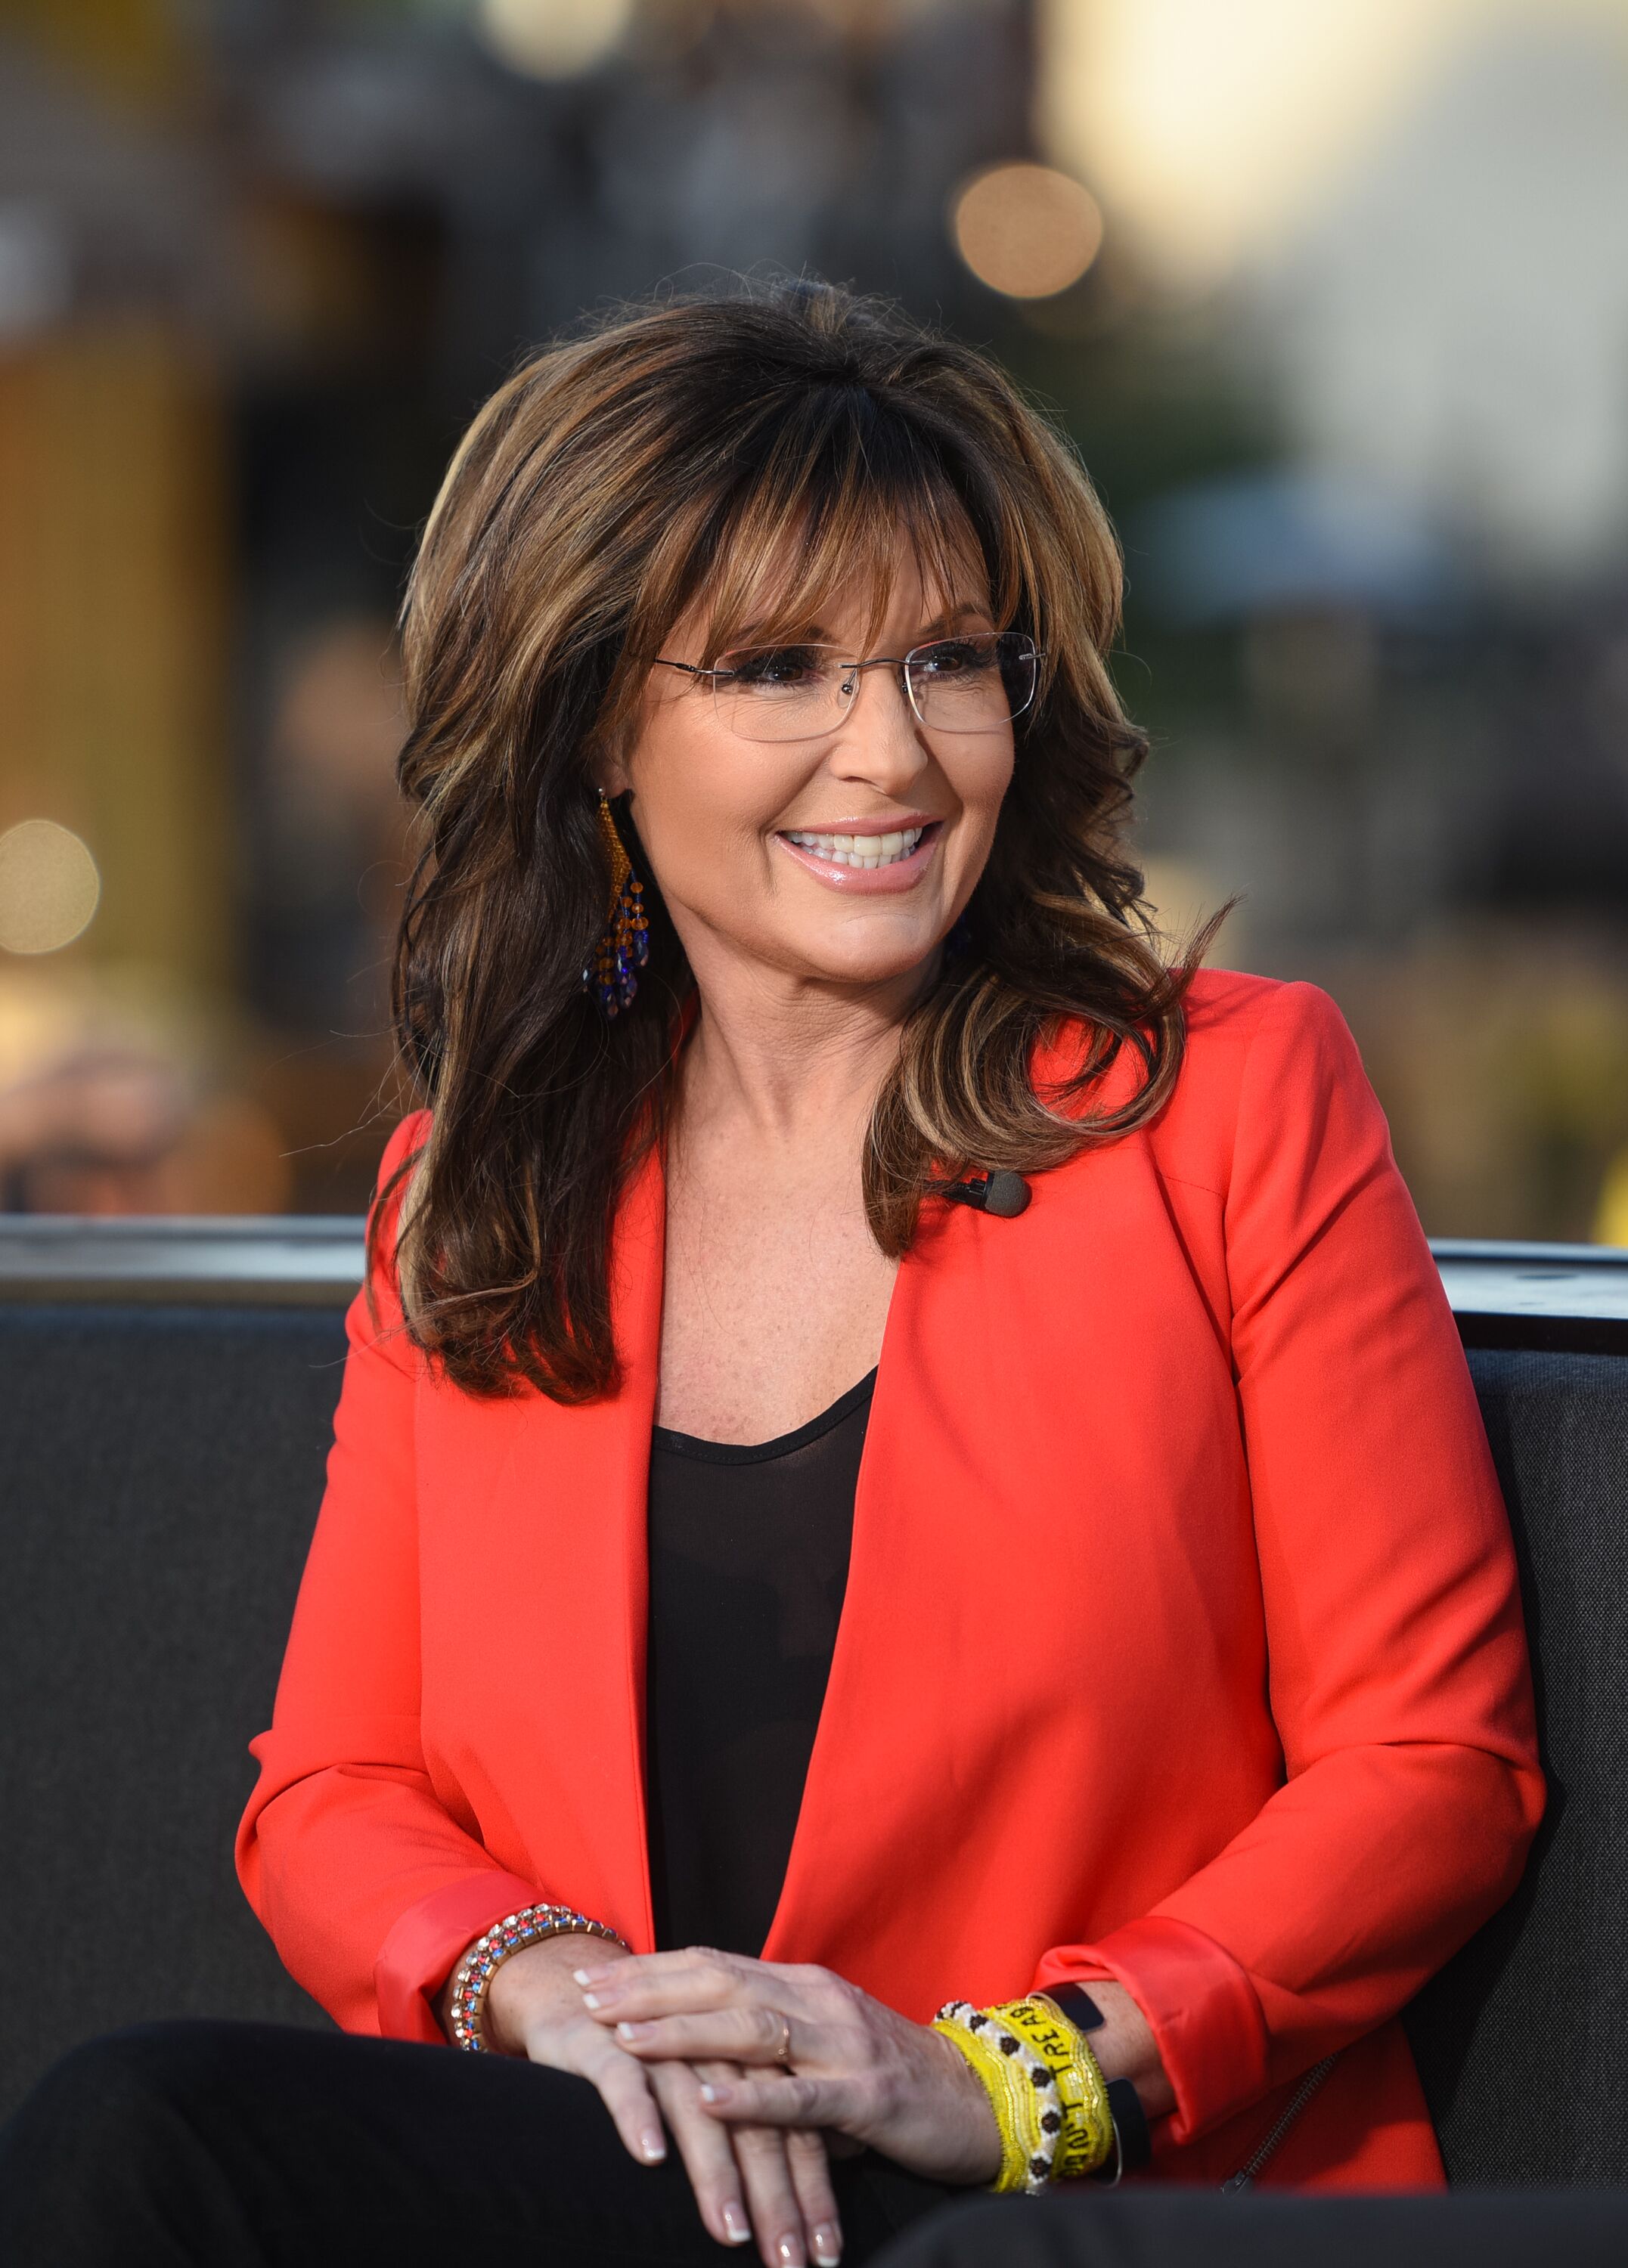  Sarah Palin signs copies of her new book "Good Tidings and Great Joy: Protecting the Heart of Christmas" on November 21, 2013 at Mall of America in Bloomington, Minnesota. | Photo: Getty Images